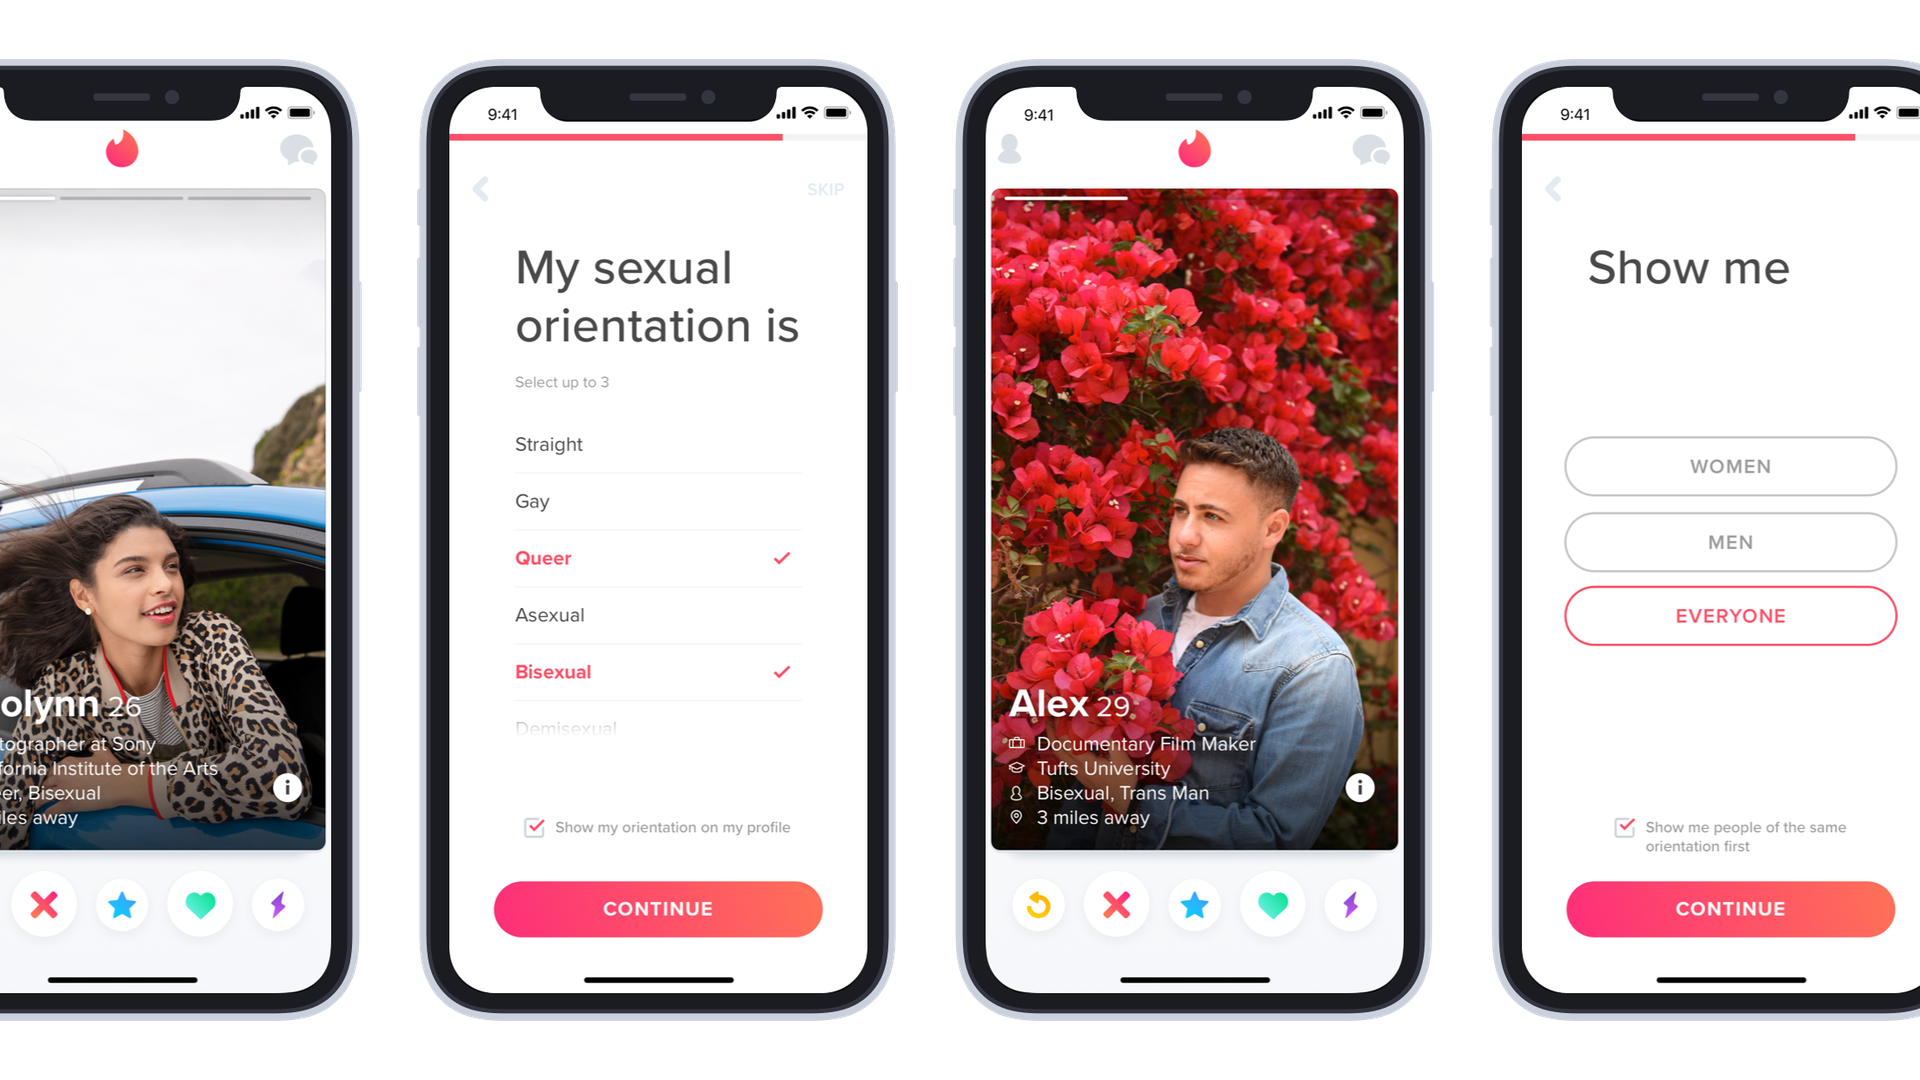 iPhone screenshots showing Tinder's redesigned sexuality options